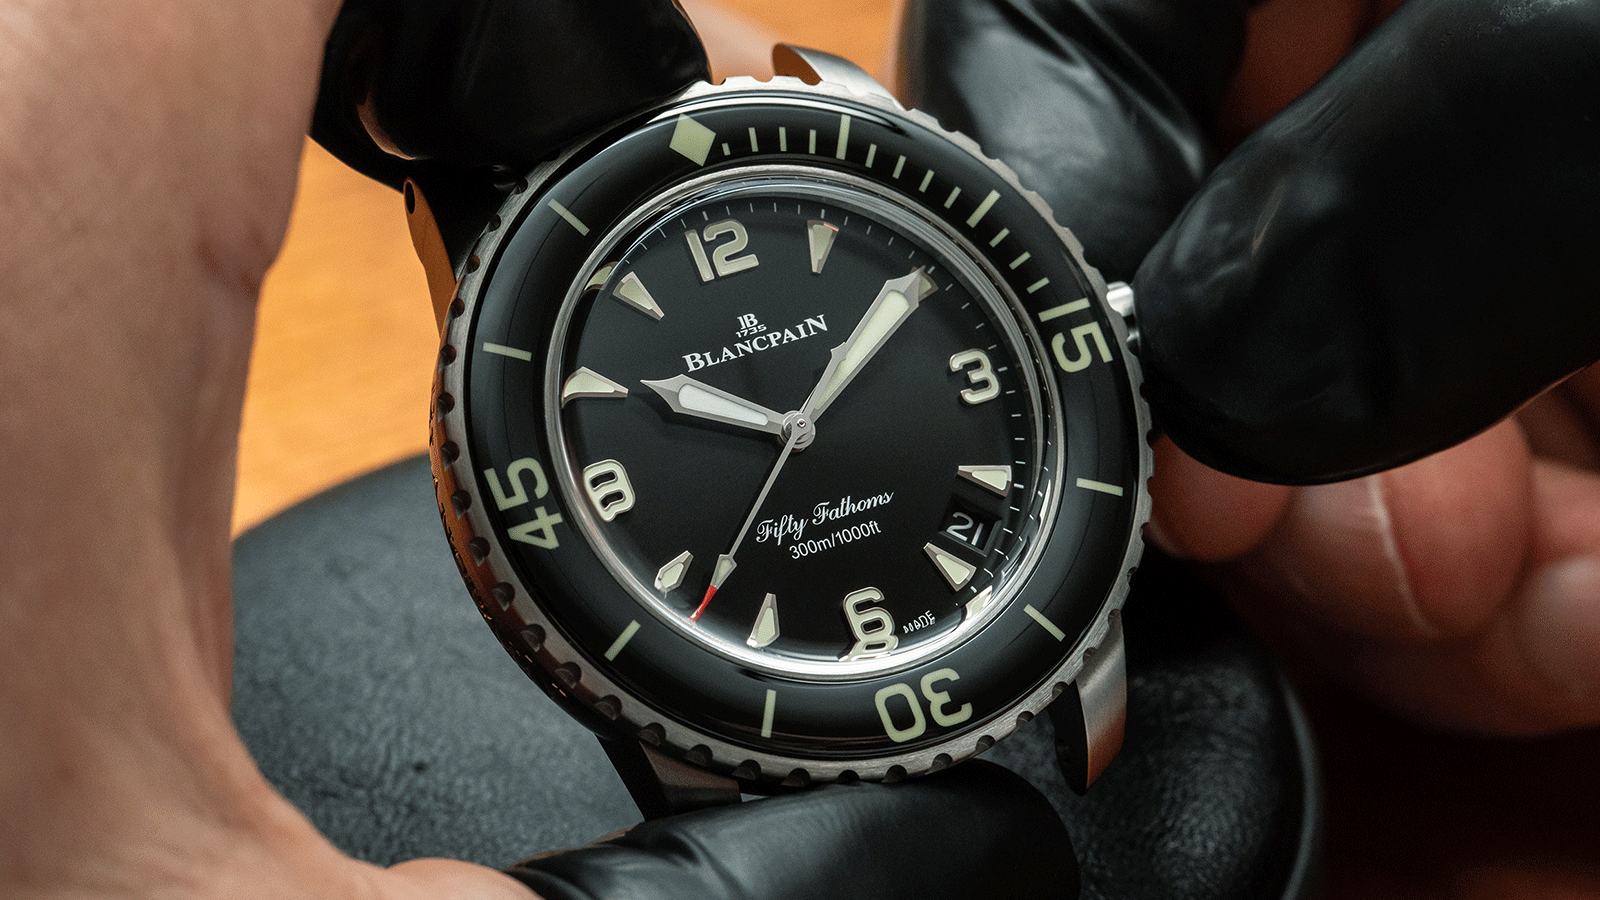 Its sturdiness, water-resistance, secure rotating-bezel system, anti-magnetism and extreme legibility are all features designed specifically for scuba diving that were adopted by the entire industry at the time and have endured to this day. 